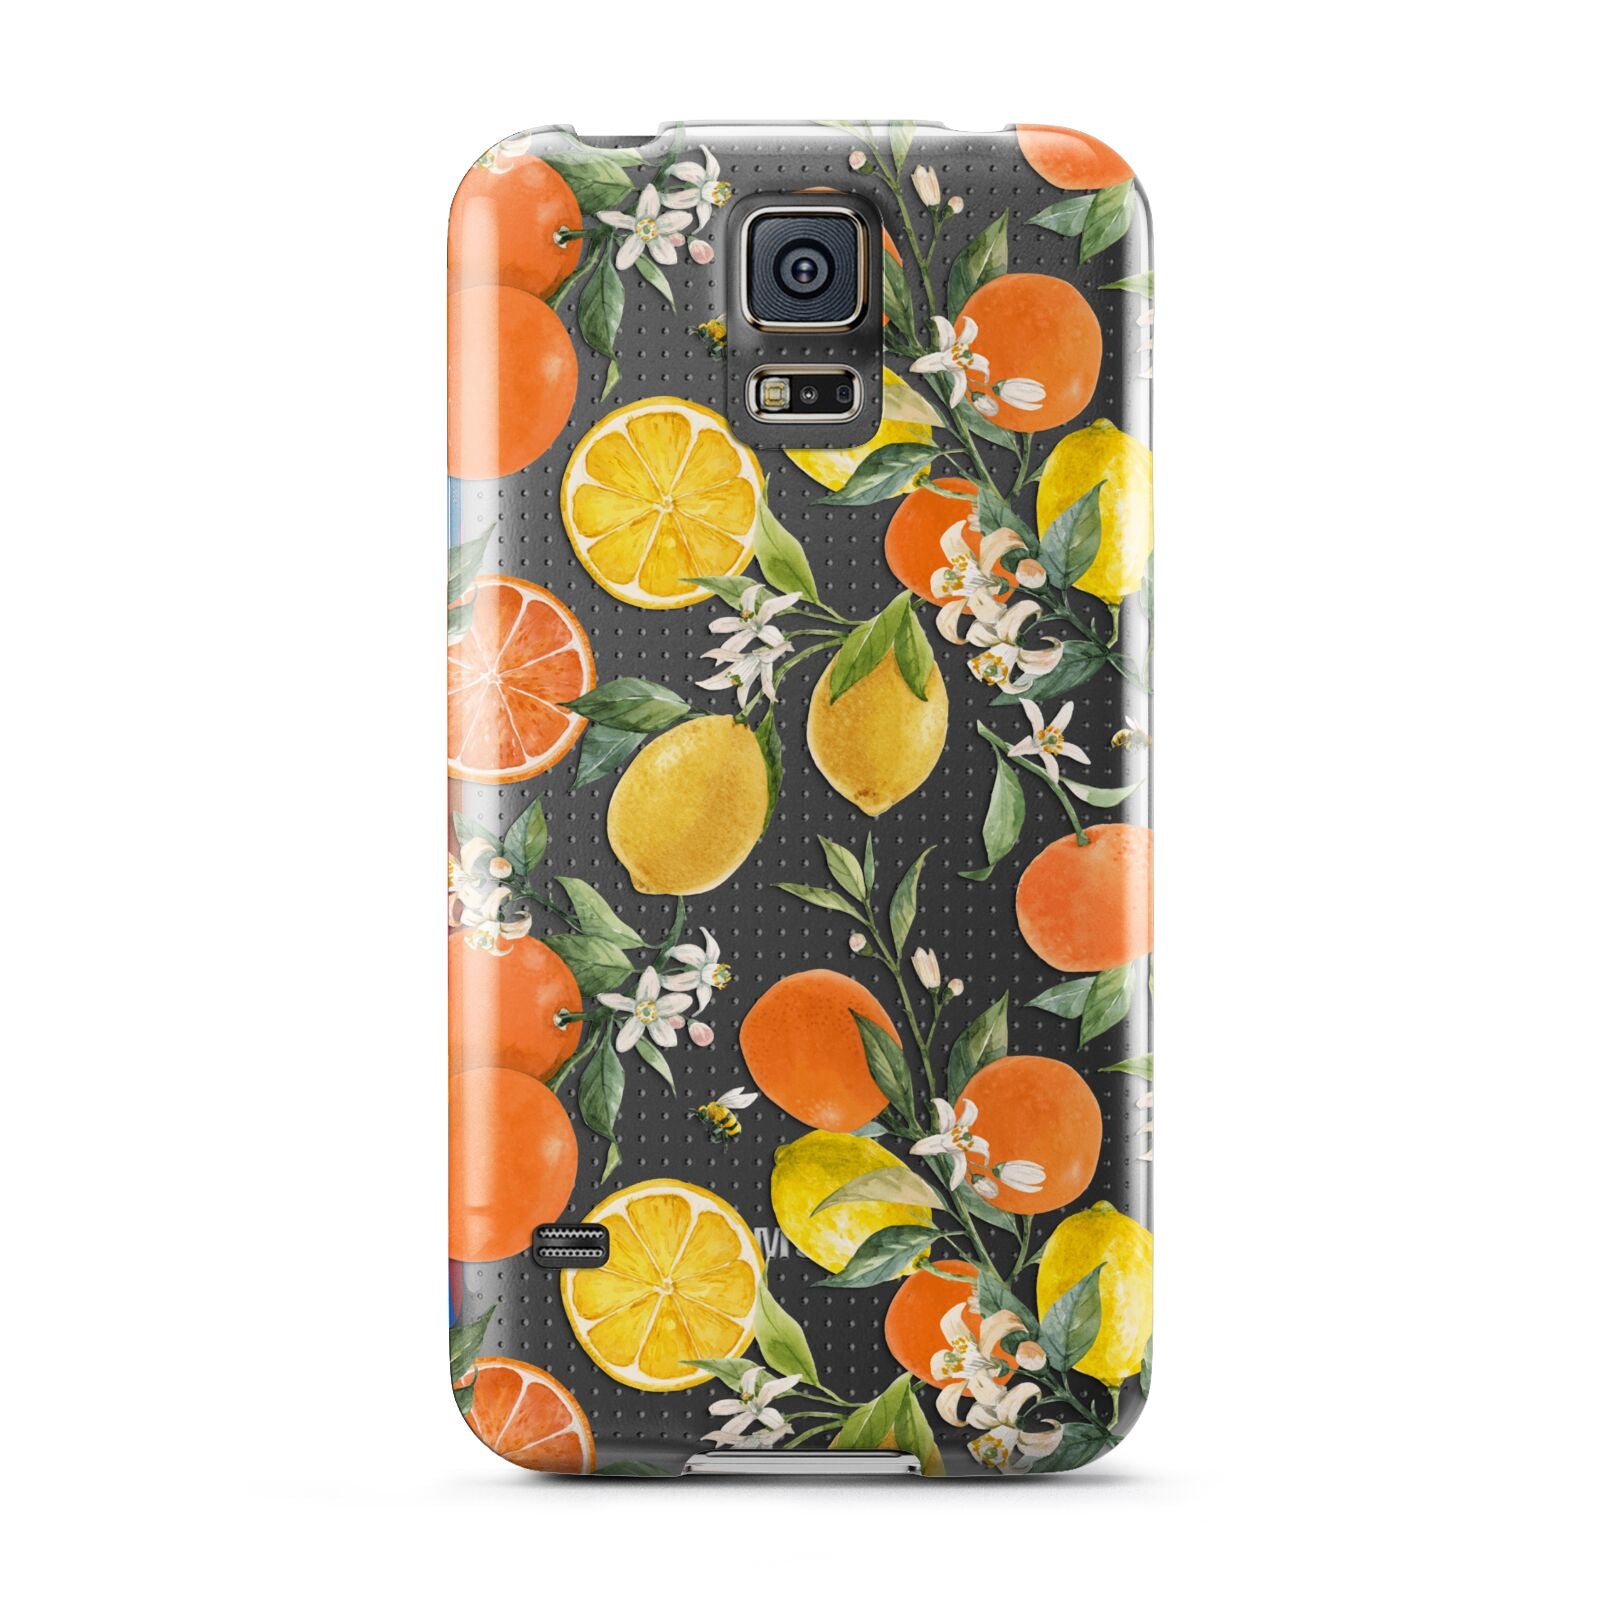 Lemons and Oranges Samsung Galaxy S5 Case